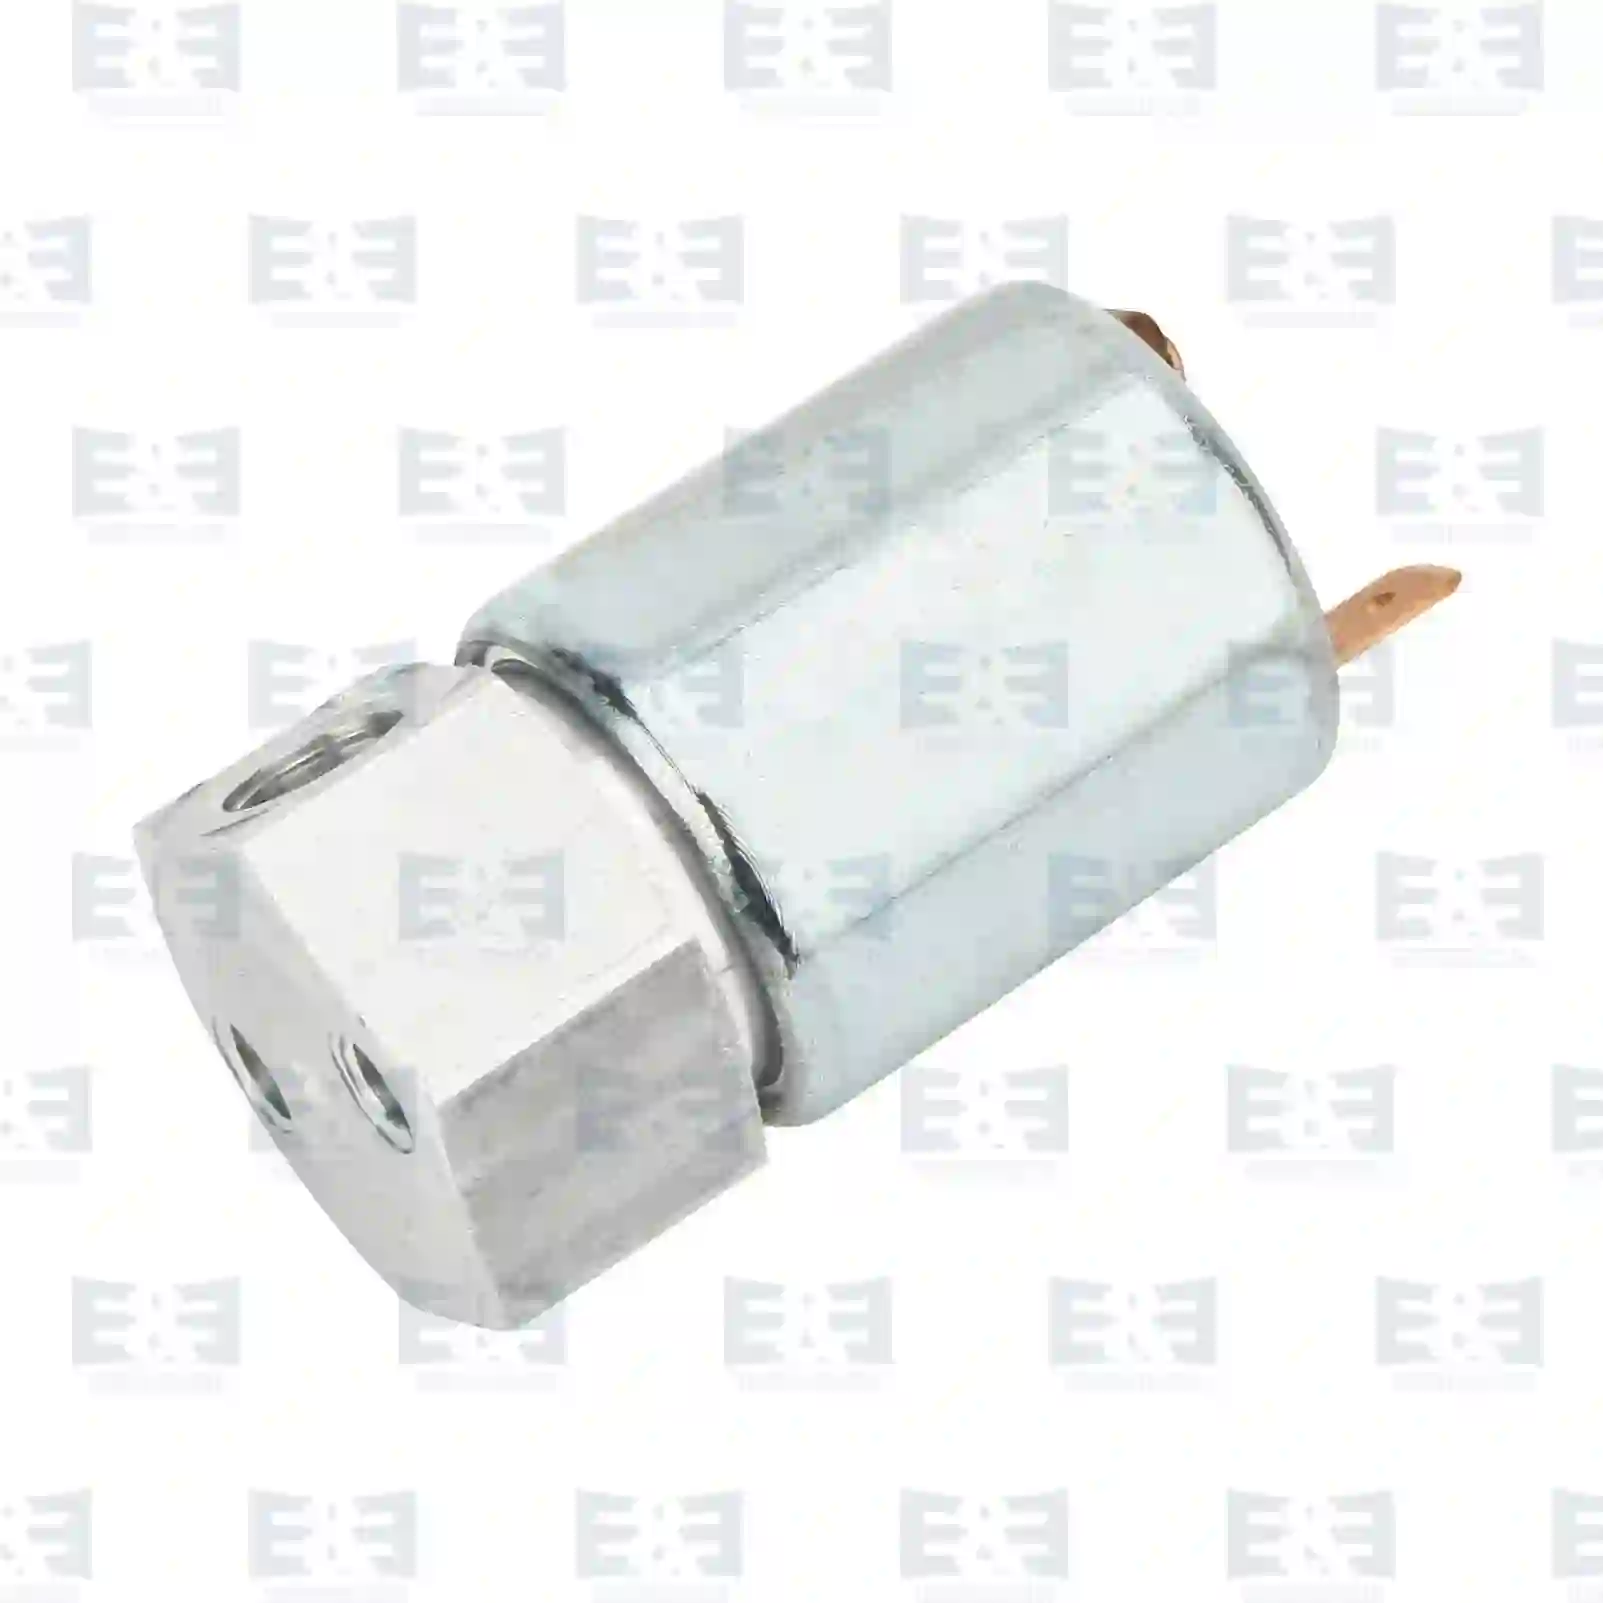 Solenoid valve, flame starter system, 2E2209584, 01161133, 04754840, 08122190, N443360, 04754840, 01173776, 02416643, 08122190, 42487003, 01161133, 04754840, 08122190, 5004864, 51259020010, 51259020033, 51259020052, 51259020059, 51259029010, 81259026043, 85200010681, 0000781549, N0443360, 5000270882, 5000589867, 5001000333, 292190600, 0001116153, 0001116610, 79100710076, 002416643, 4754840 ||  2E2209584 E&E Truck Spare Parts | Truck Spare Parts, Auotomotive Spare Parts Solenoid valve, flame starter system, 2E2209584, 01161133, 04754840, 08122190, N443360, 04754840, 01173776, 02416643, 08122190, 42487003, 01161133, 04754840, 08122190, 5004864, 51259020010, 51259020033, 51259020052, 51259020059, 51259029010, 81259026043, 85200010681, 0000781549, N0443360, 5000270882, 5000589867, 5001000333, 292190600, 0001116153, 0001116610, 79100710076, 002416643, 4754840 ||  2E2209584 E&E Truck Spare Parts | Truck Spare Parts, Auotomotive Spare Parts